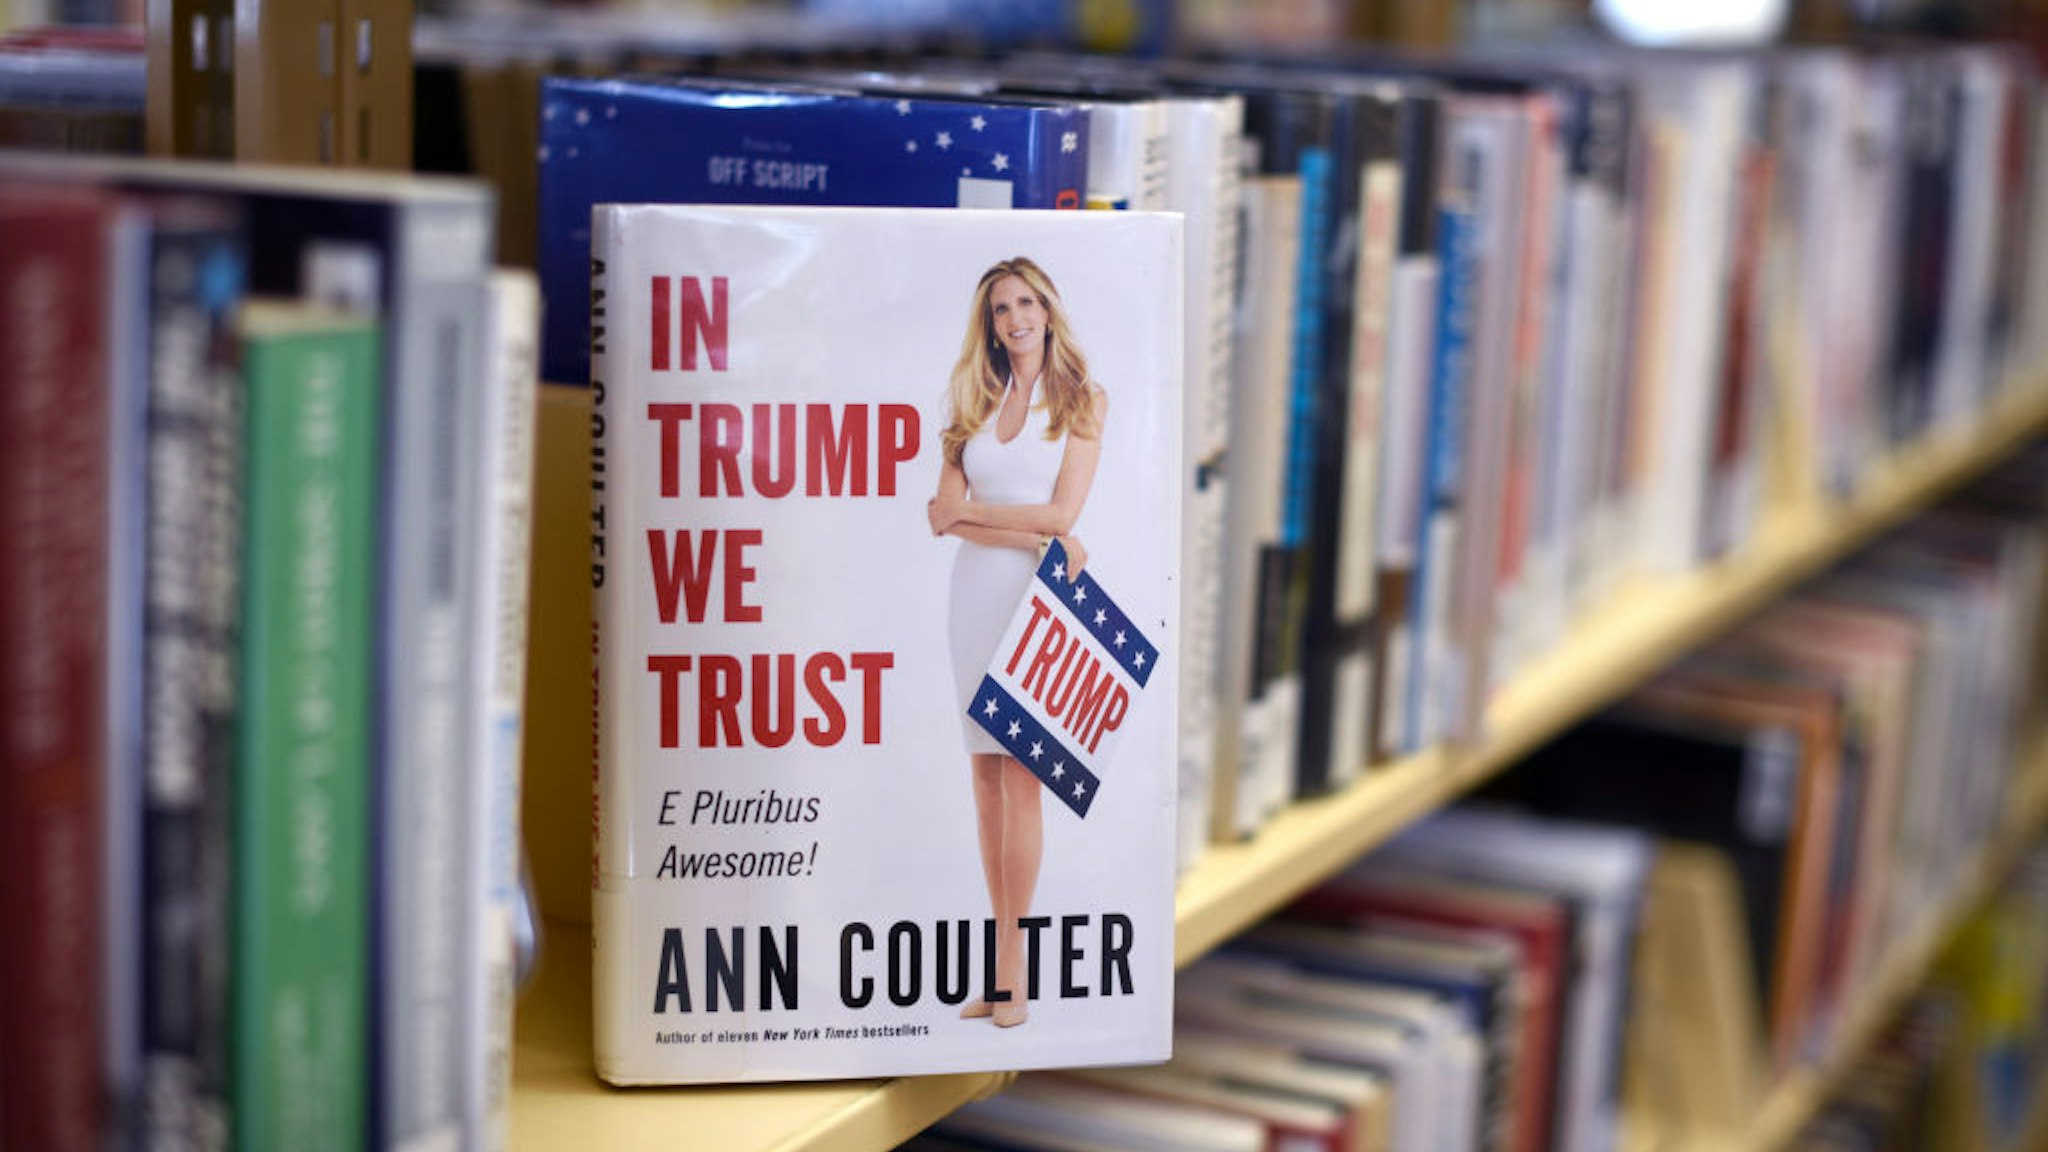 A book by conservative writer Ann Coulter titled 'In Trump We Trust' is among the books available at a public library in Santa Fe, New Mexico. (Photo by Robert Alexander/Getty Images)